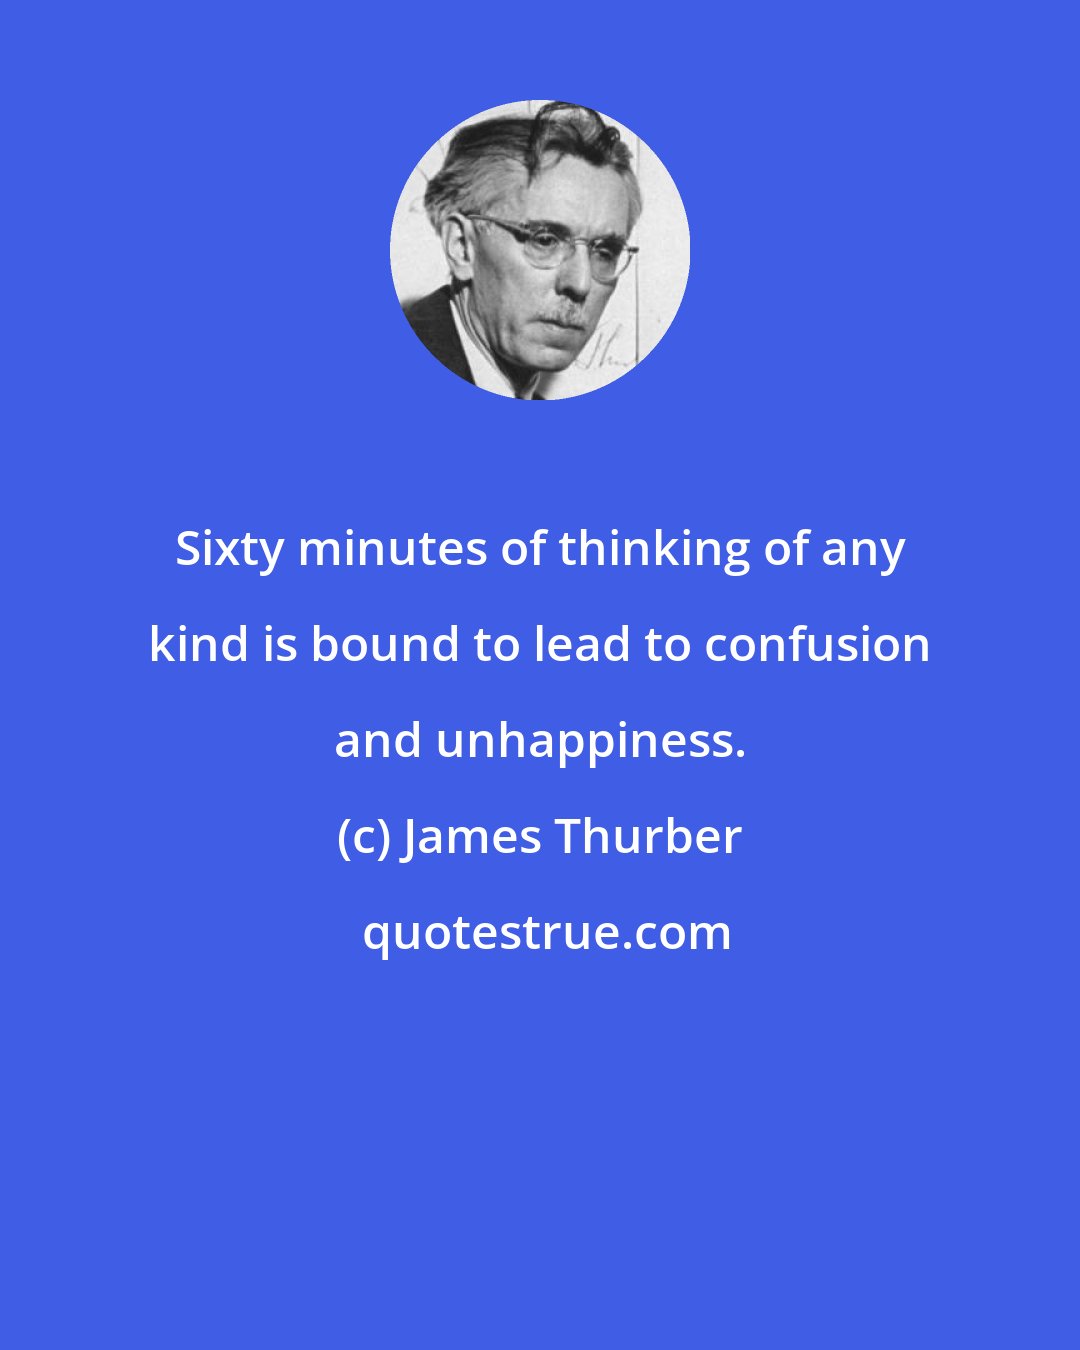 James Thurber: Sixty minutes of thinking of any kind is bound to lead to confusion and unhappiness.